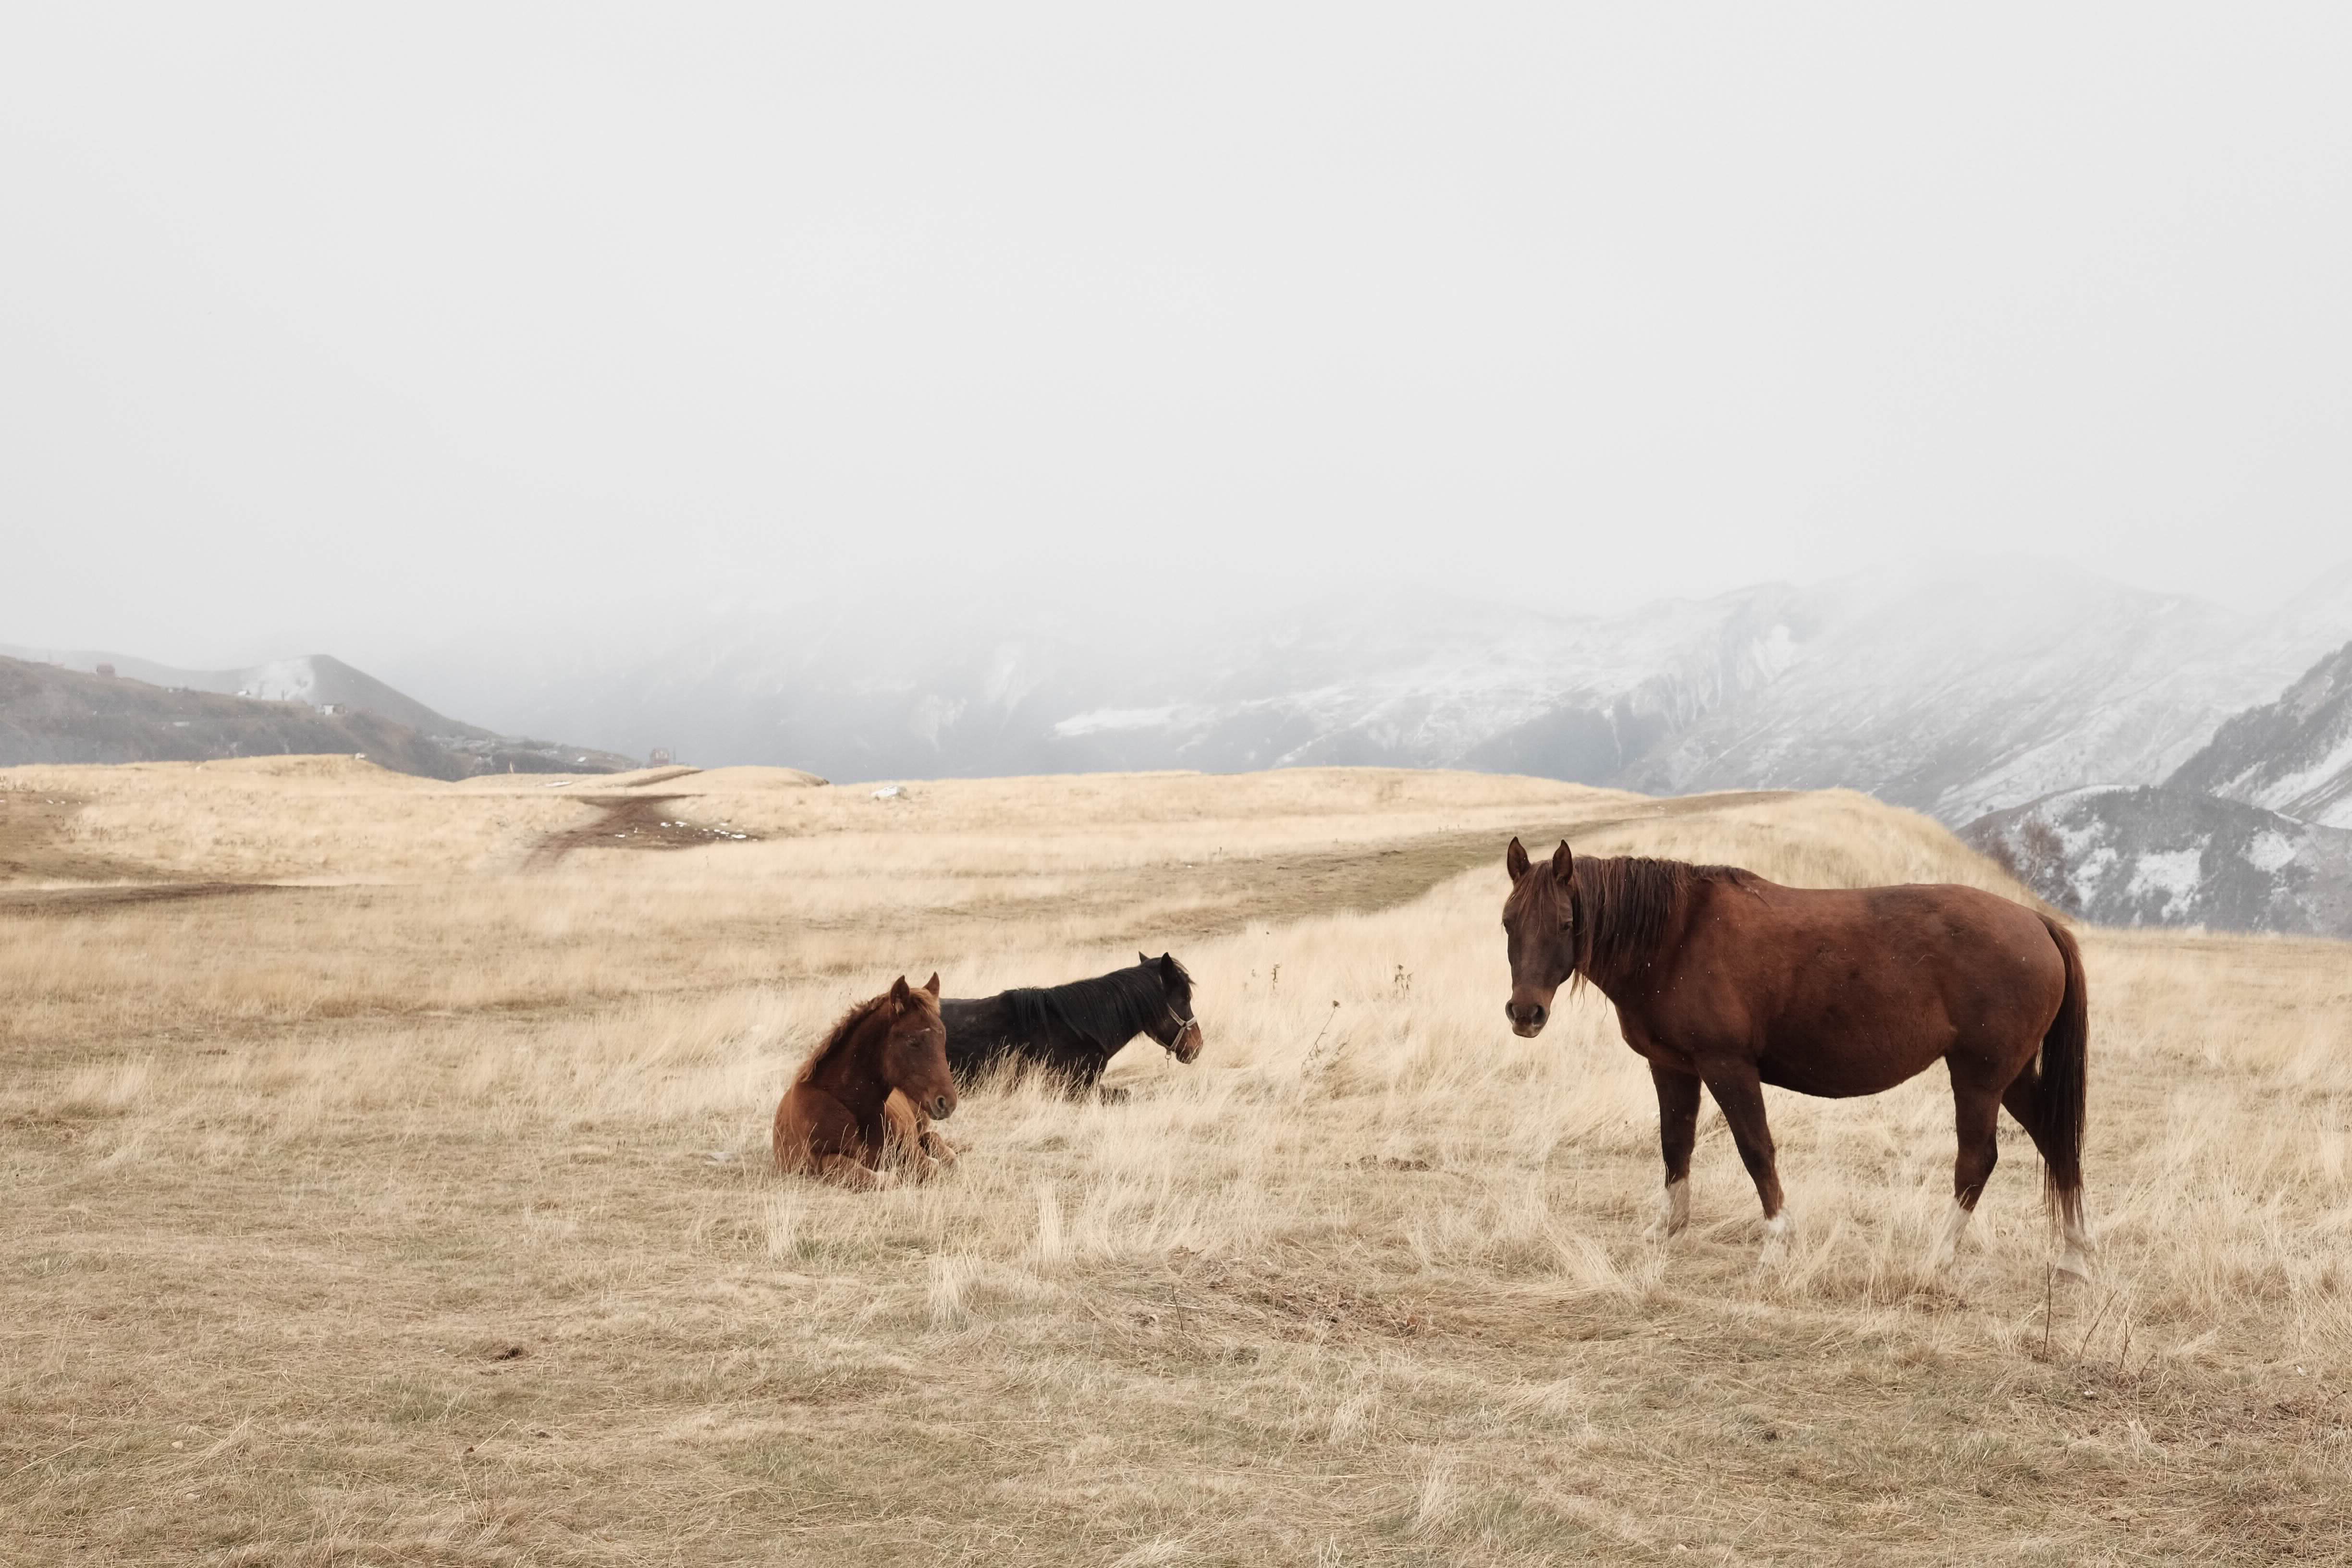 Horses, near the cliff of the side of a valley